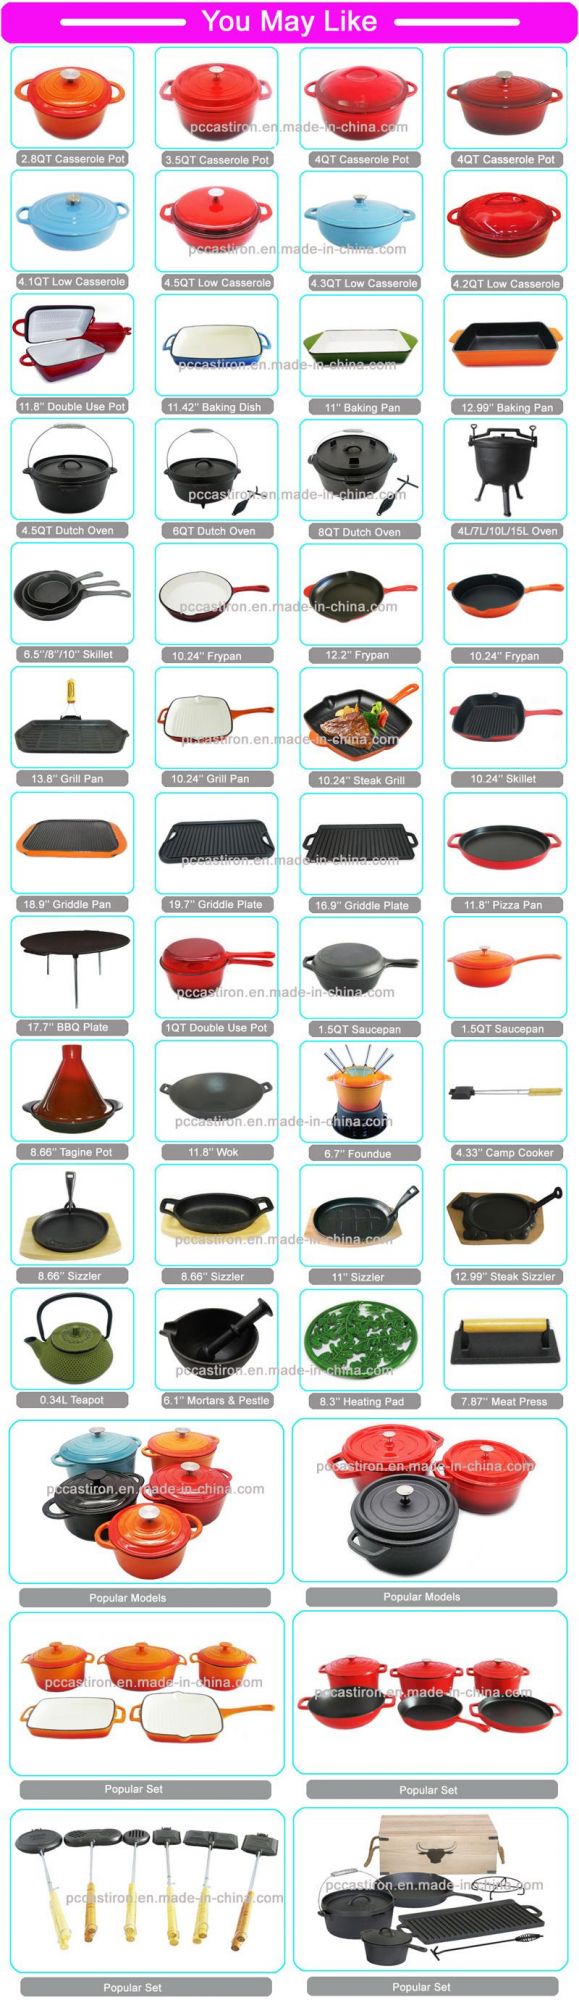 Good Quality SGS Approved Granite Mortars and Pestle Factory for Grinding Kitchenware